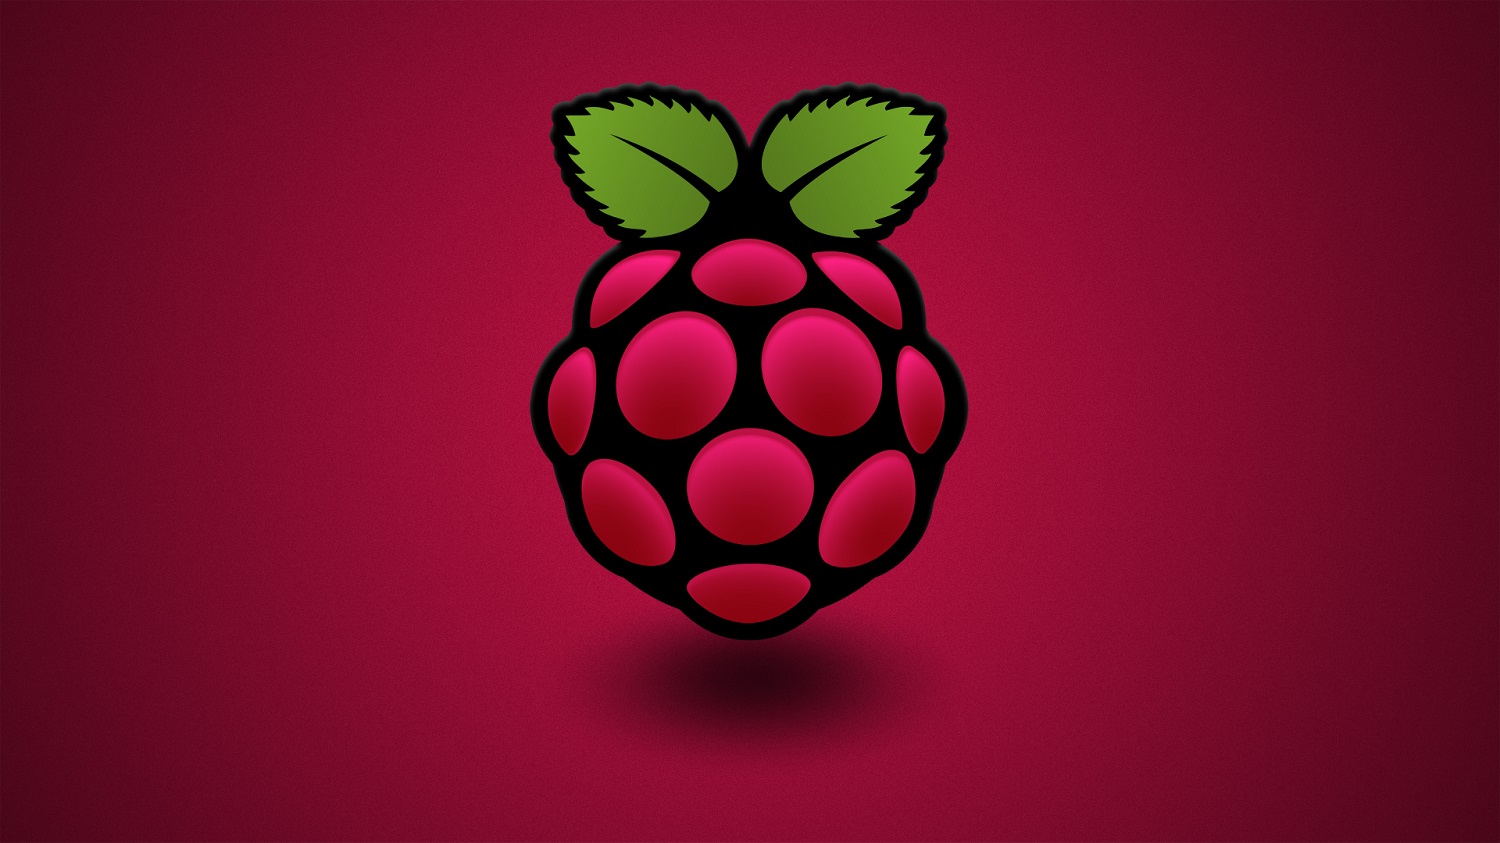 All you need to know about raspberry pi